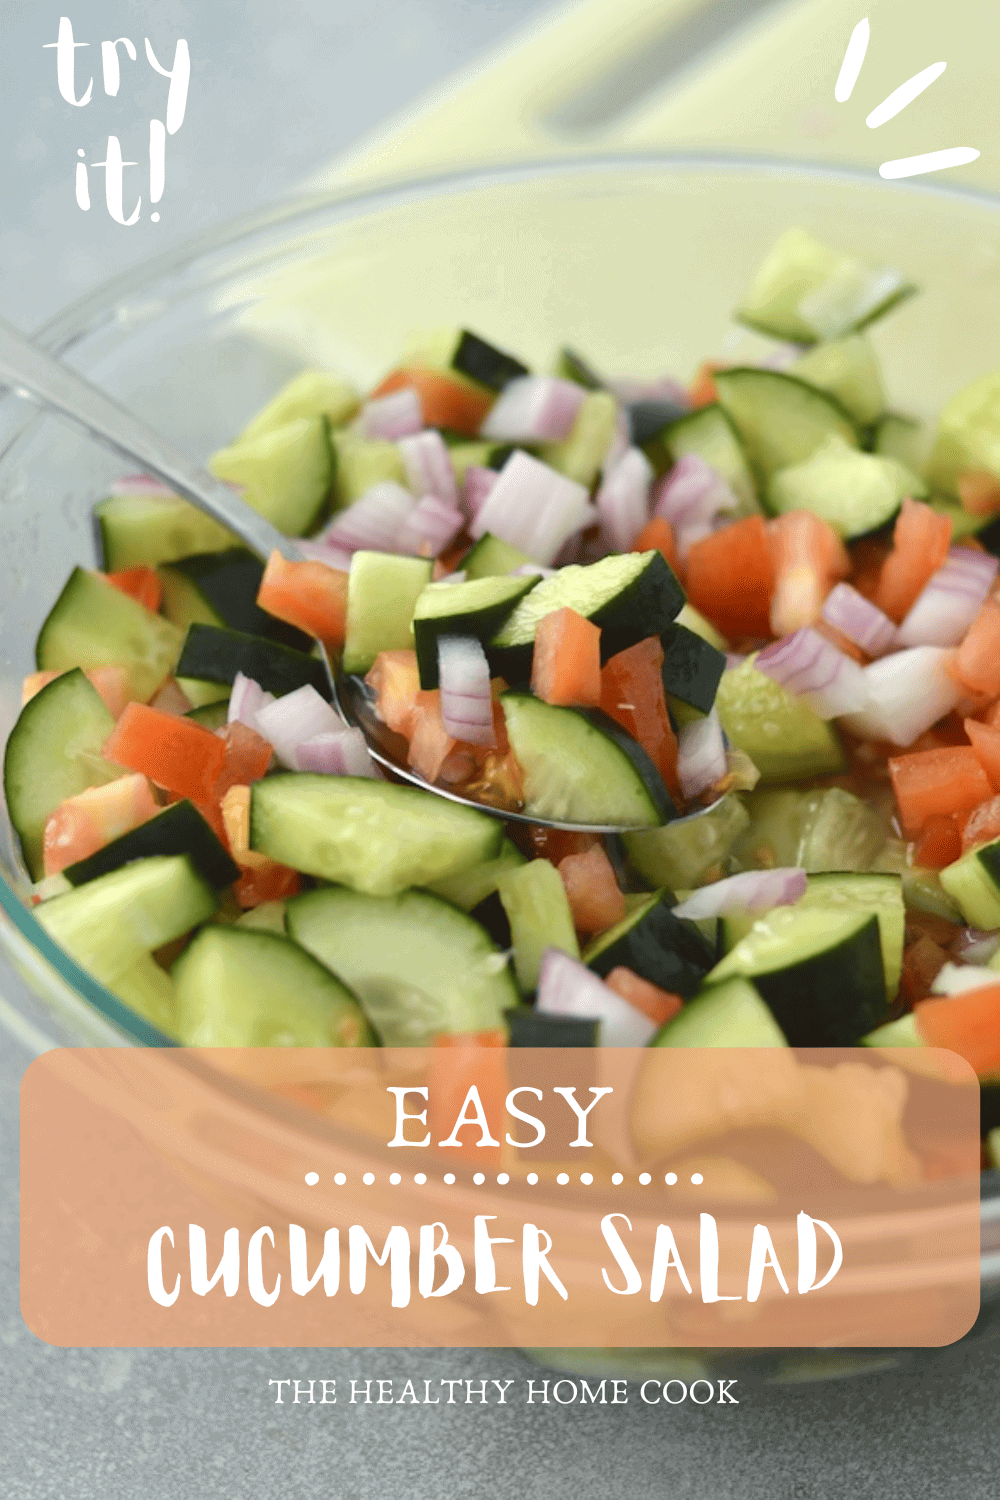 This healthy, light cucumber salad is quick to throw together and a refreshing dish to serve at any event!